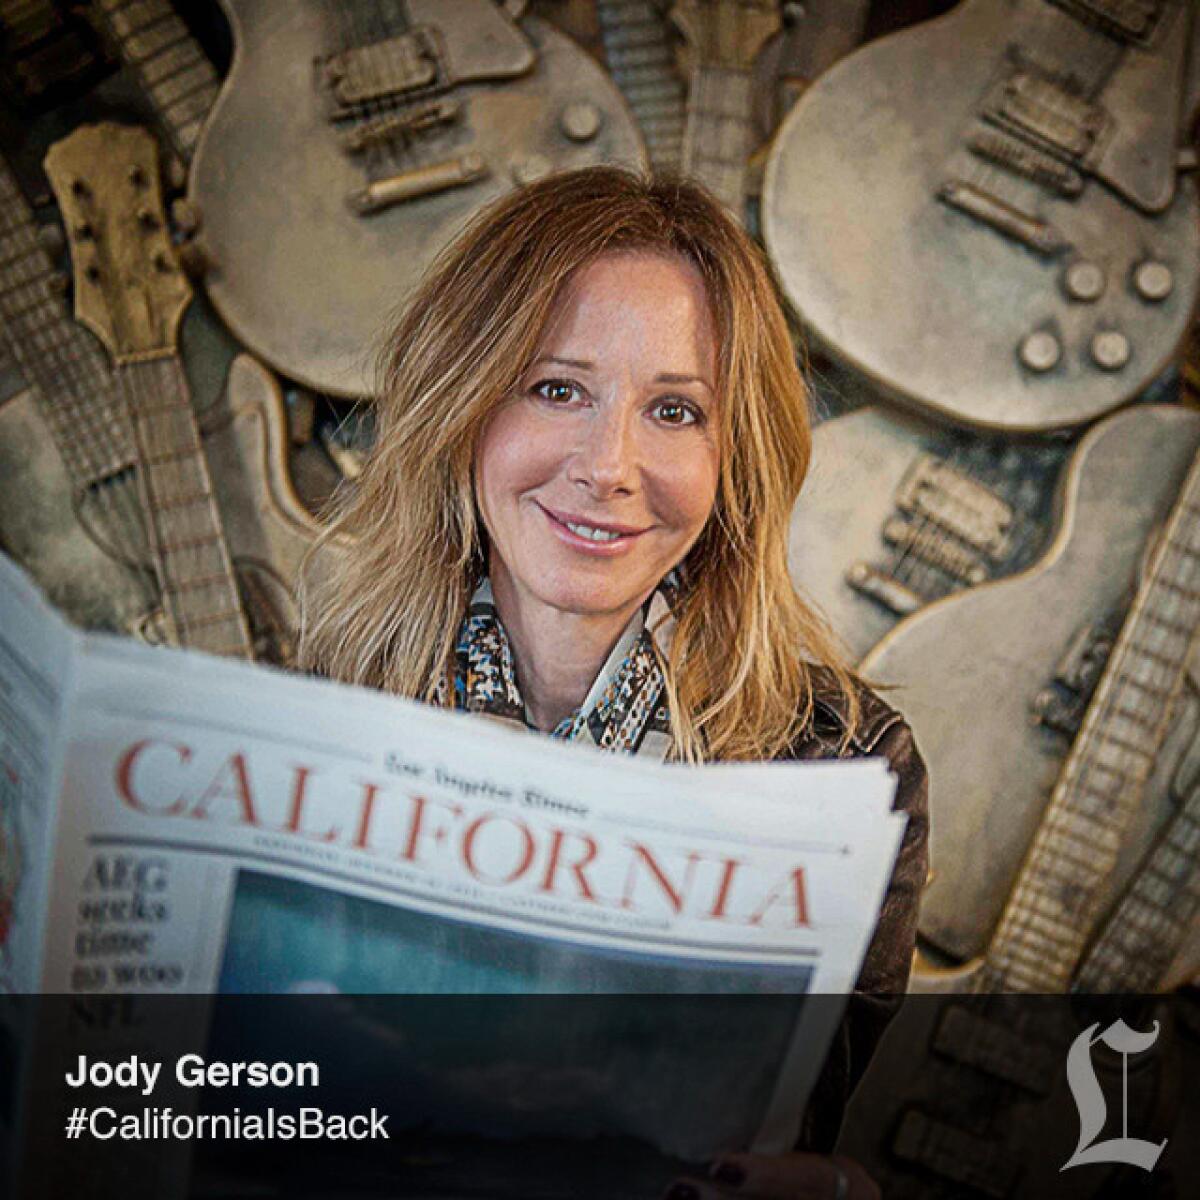 Jody Gerson, music executive soon to lead Universal Music Publishing Group.